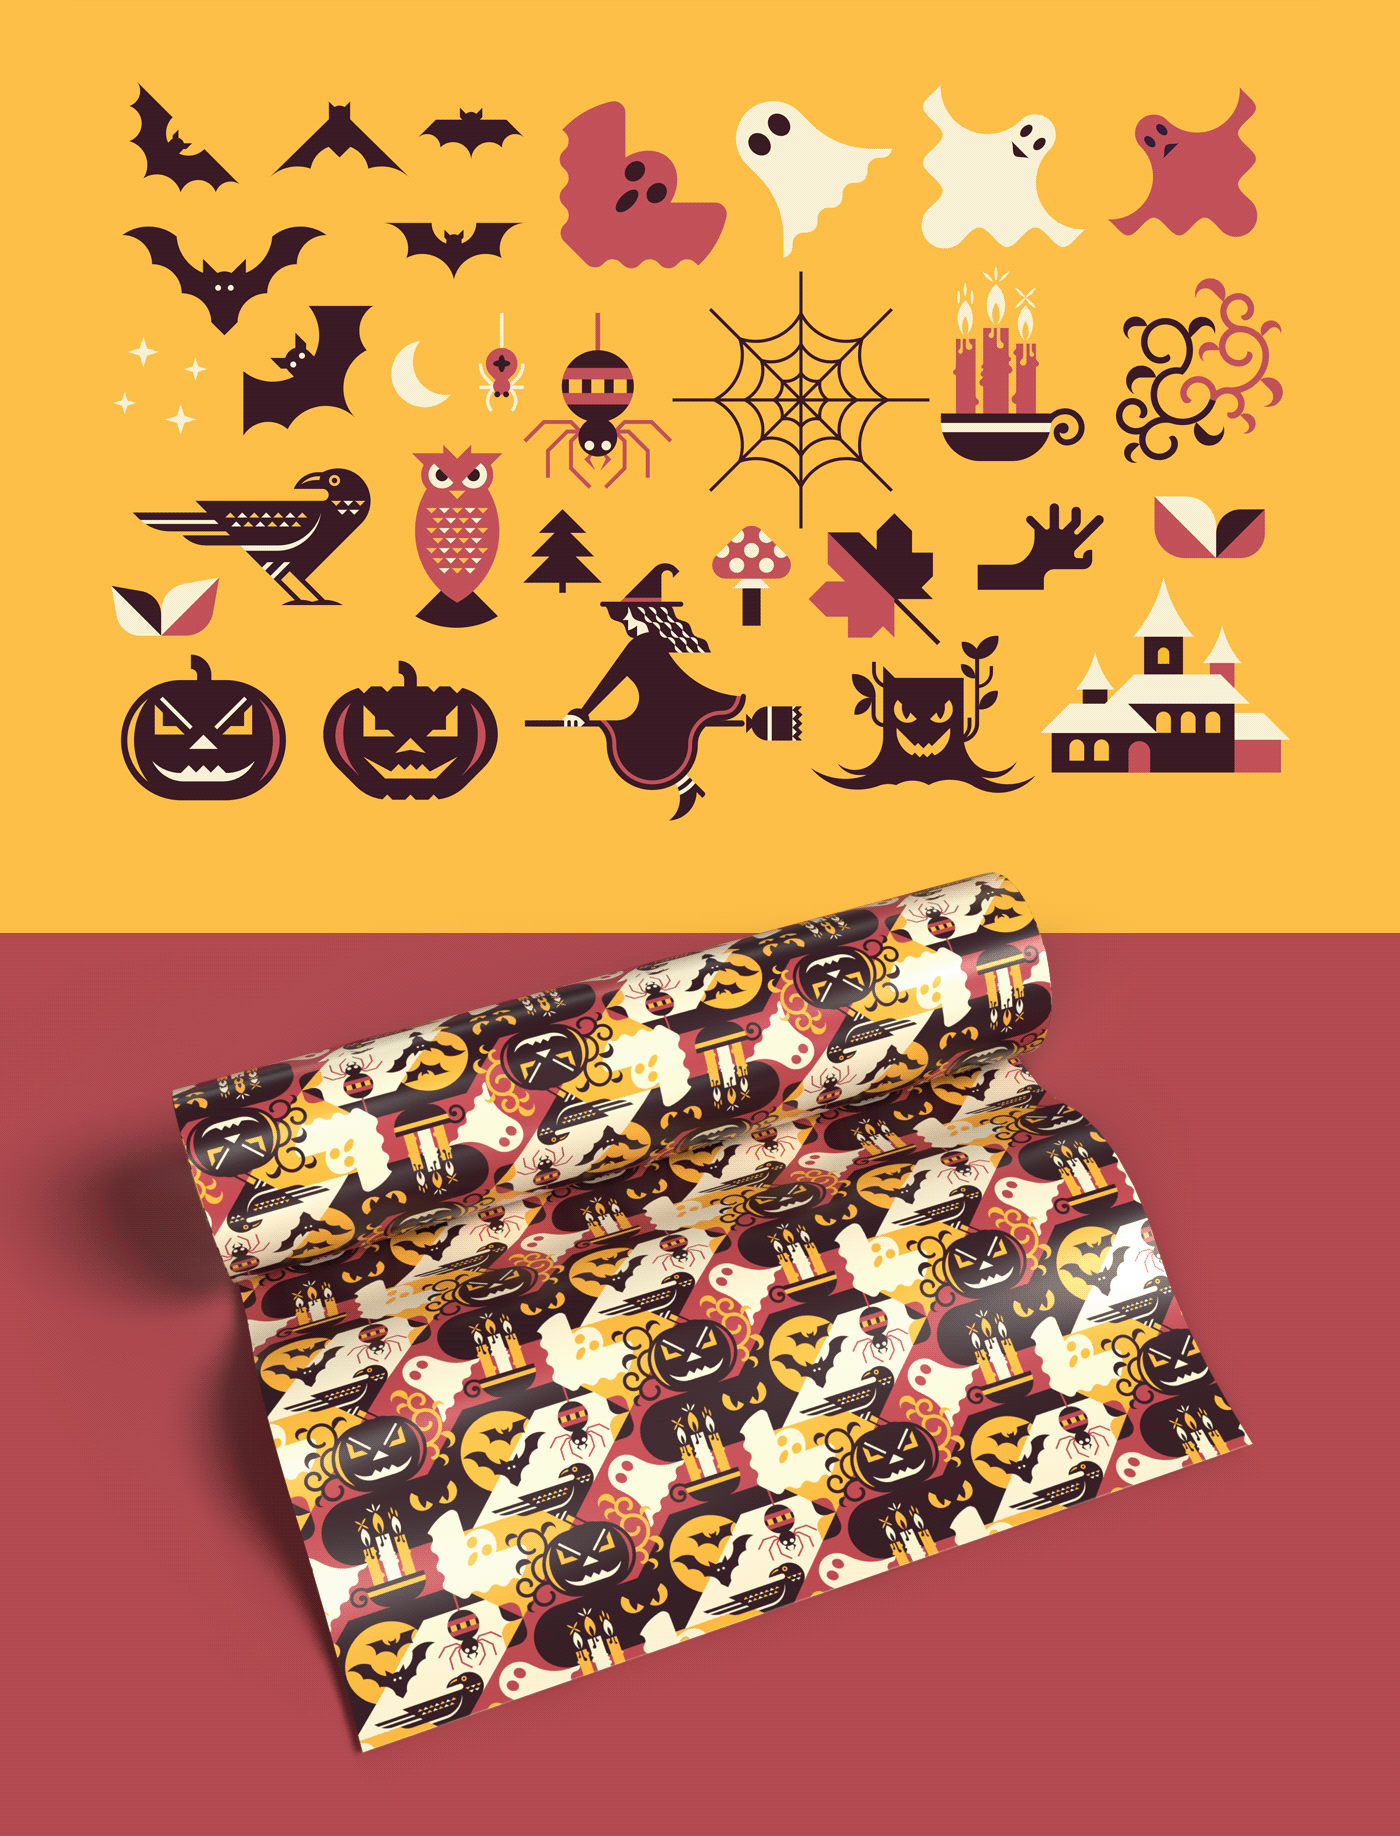 hallowenn objects vector and seamless pattern